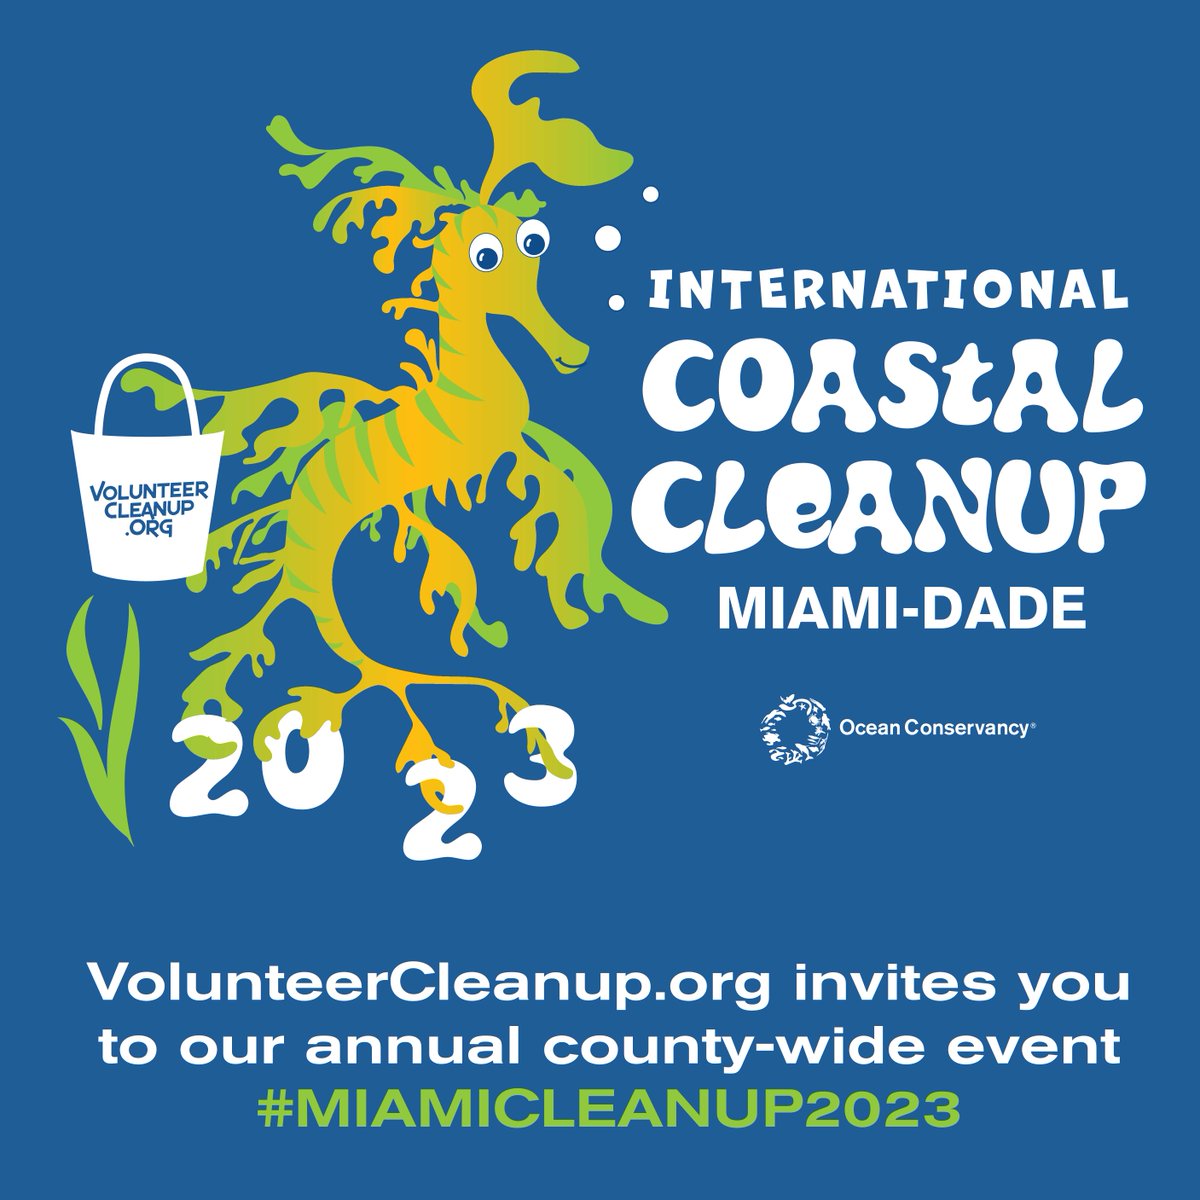 We are just a couple of days away from International Coastal Cleanup Day. Join us at Pelican Harbor Marina and show your commitment to reducing marine debris along with other volunteers across Miami-Dade. Register here: buff.ly/3r5hNwu.